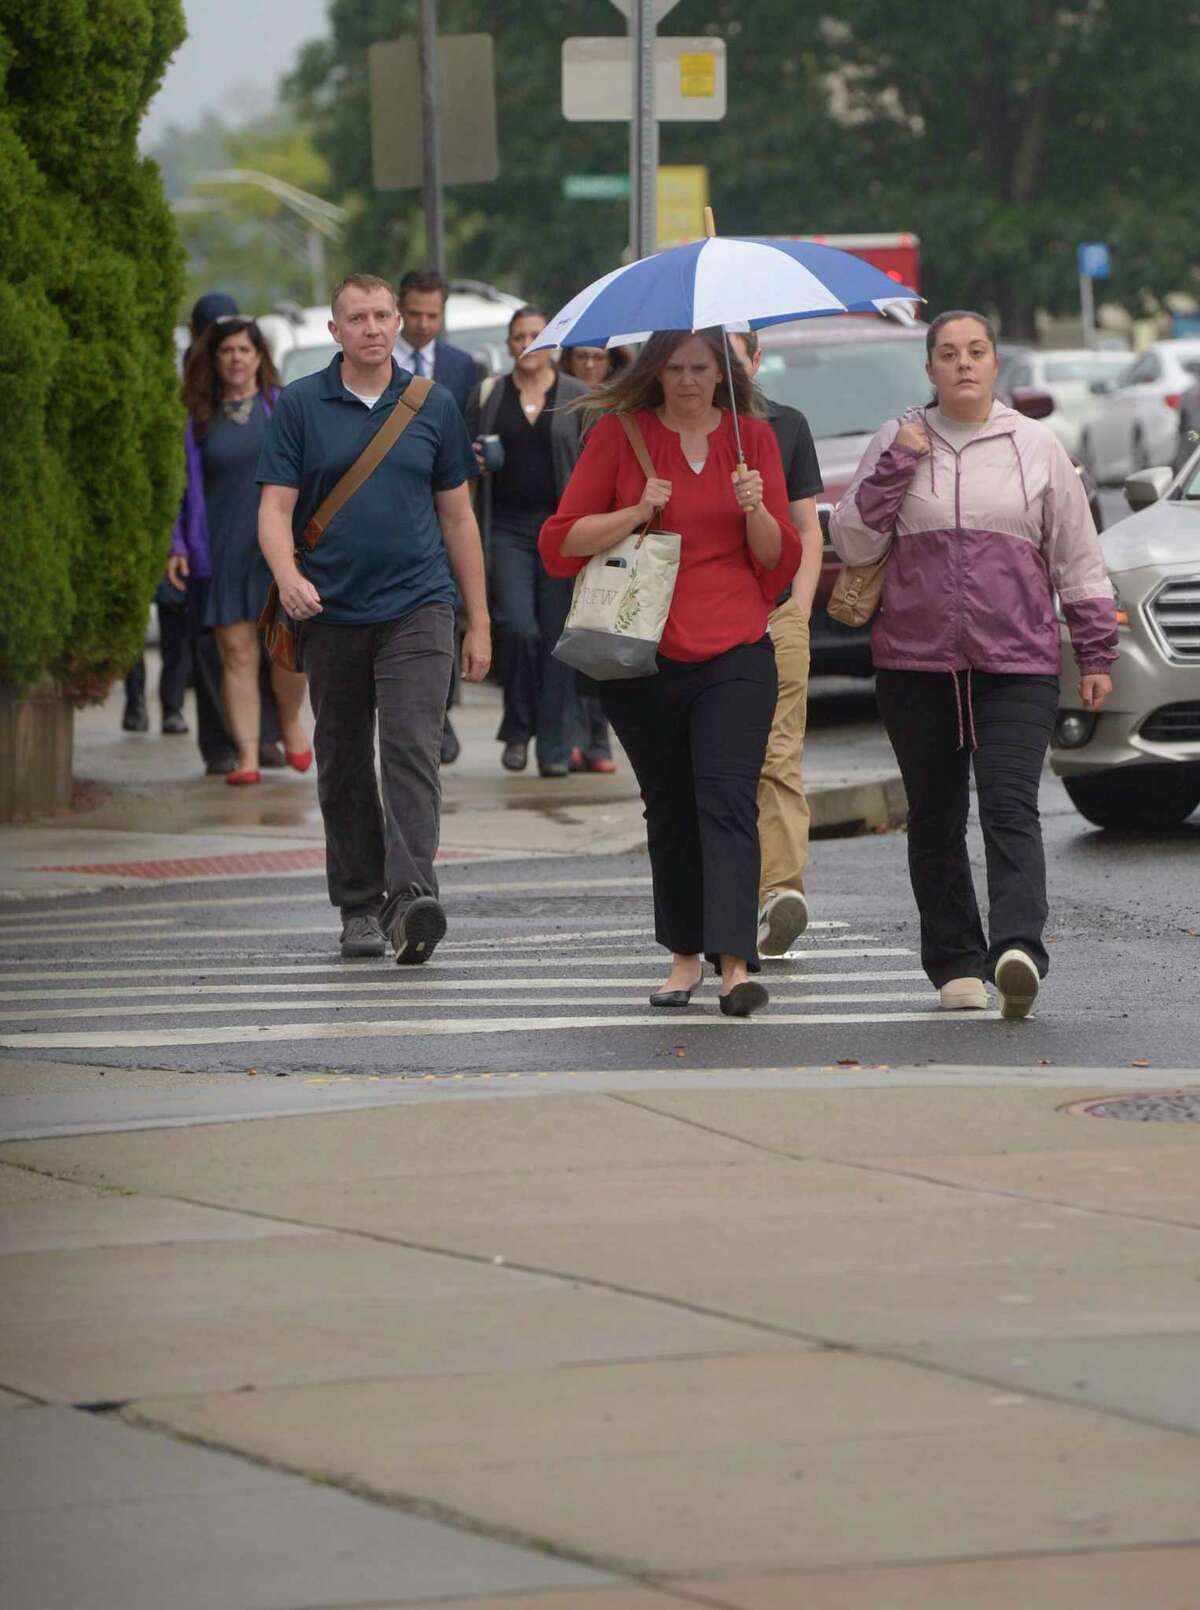 Family members walk to Superior Court in Waterbury for the defamation damages trial with Alex Jones. Thursday morning, September 22, 2022, Waterbury, Conn.